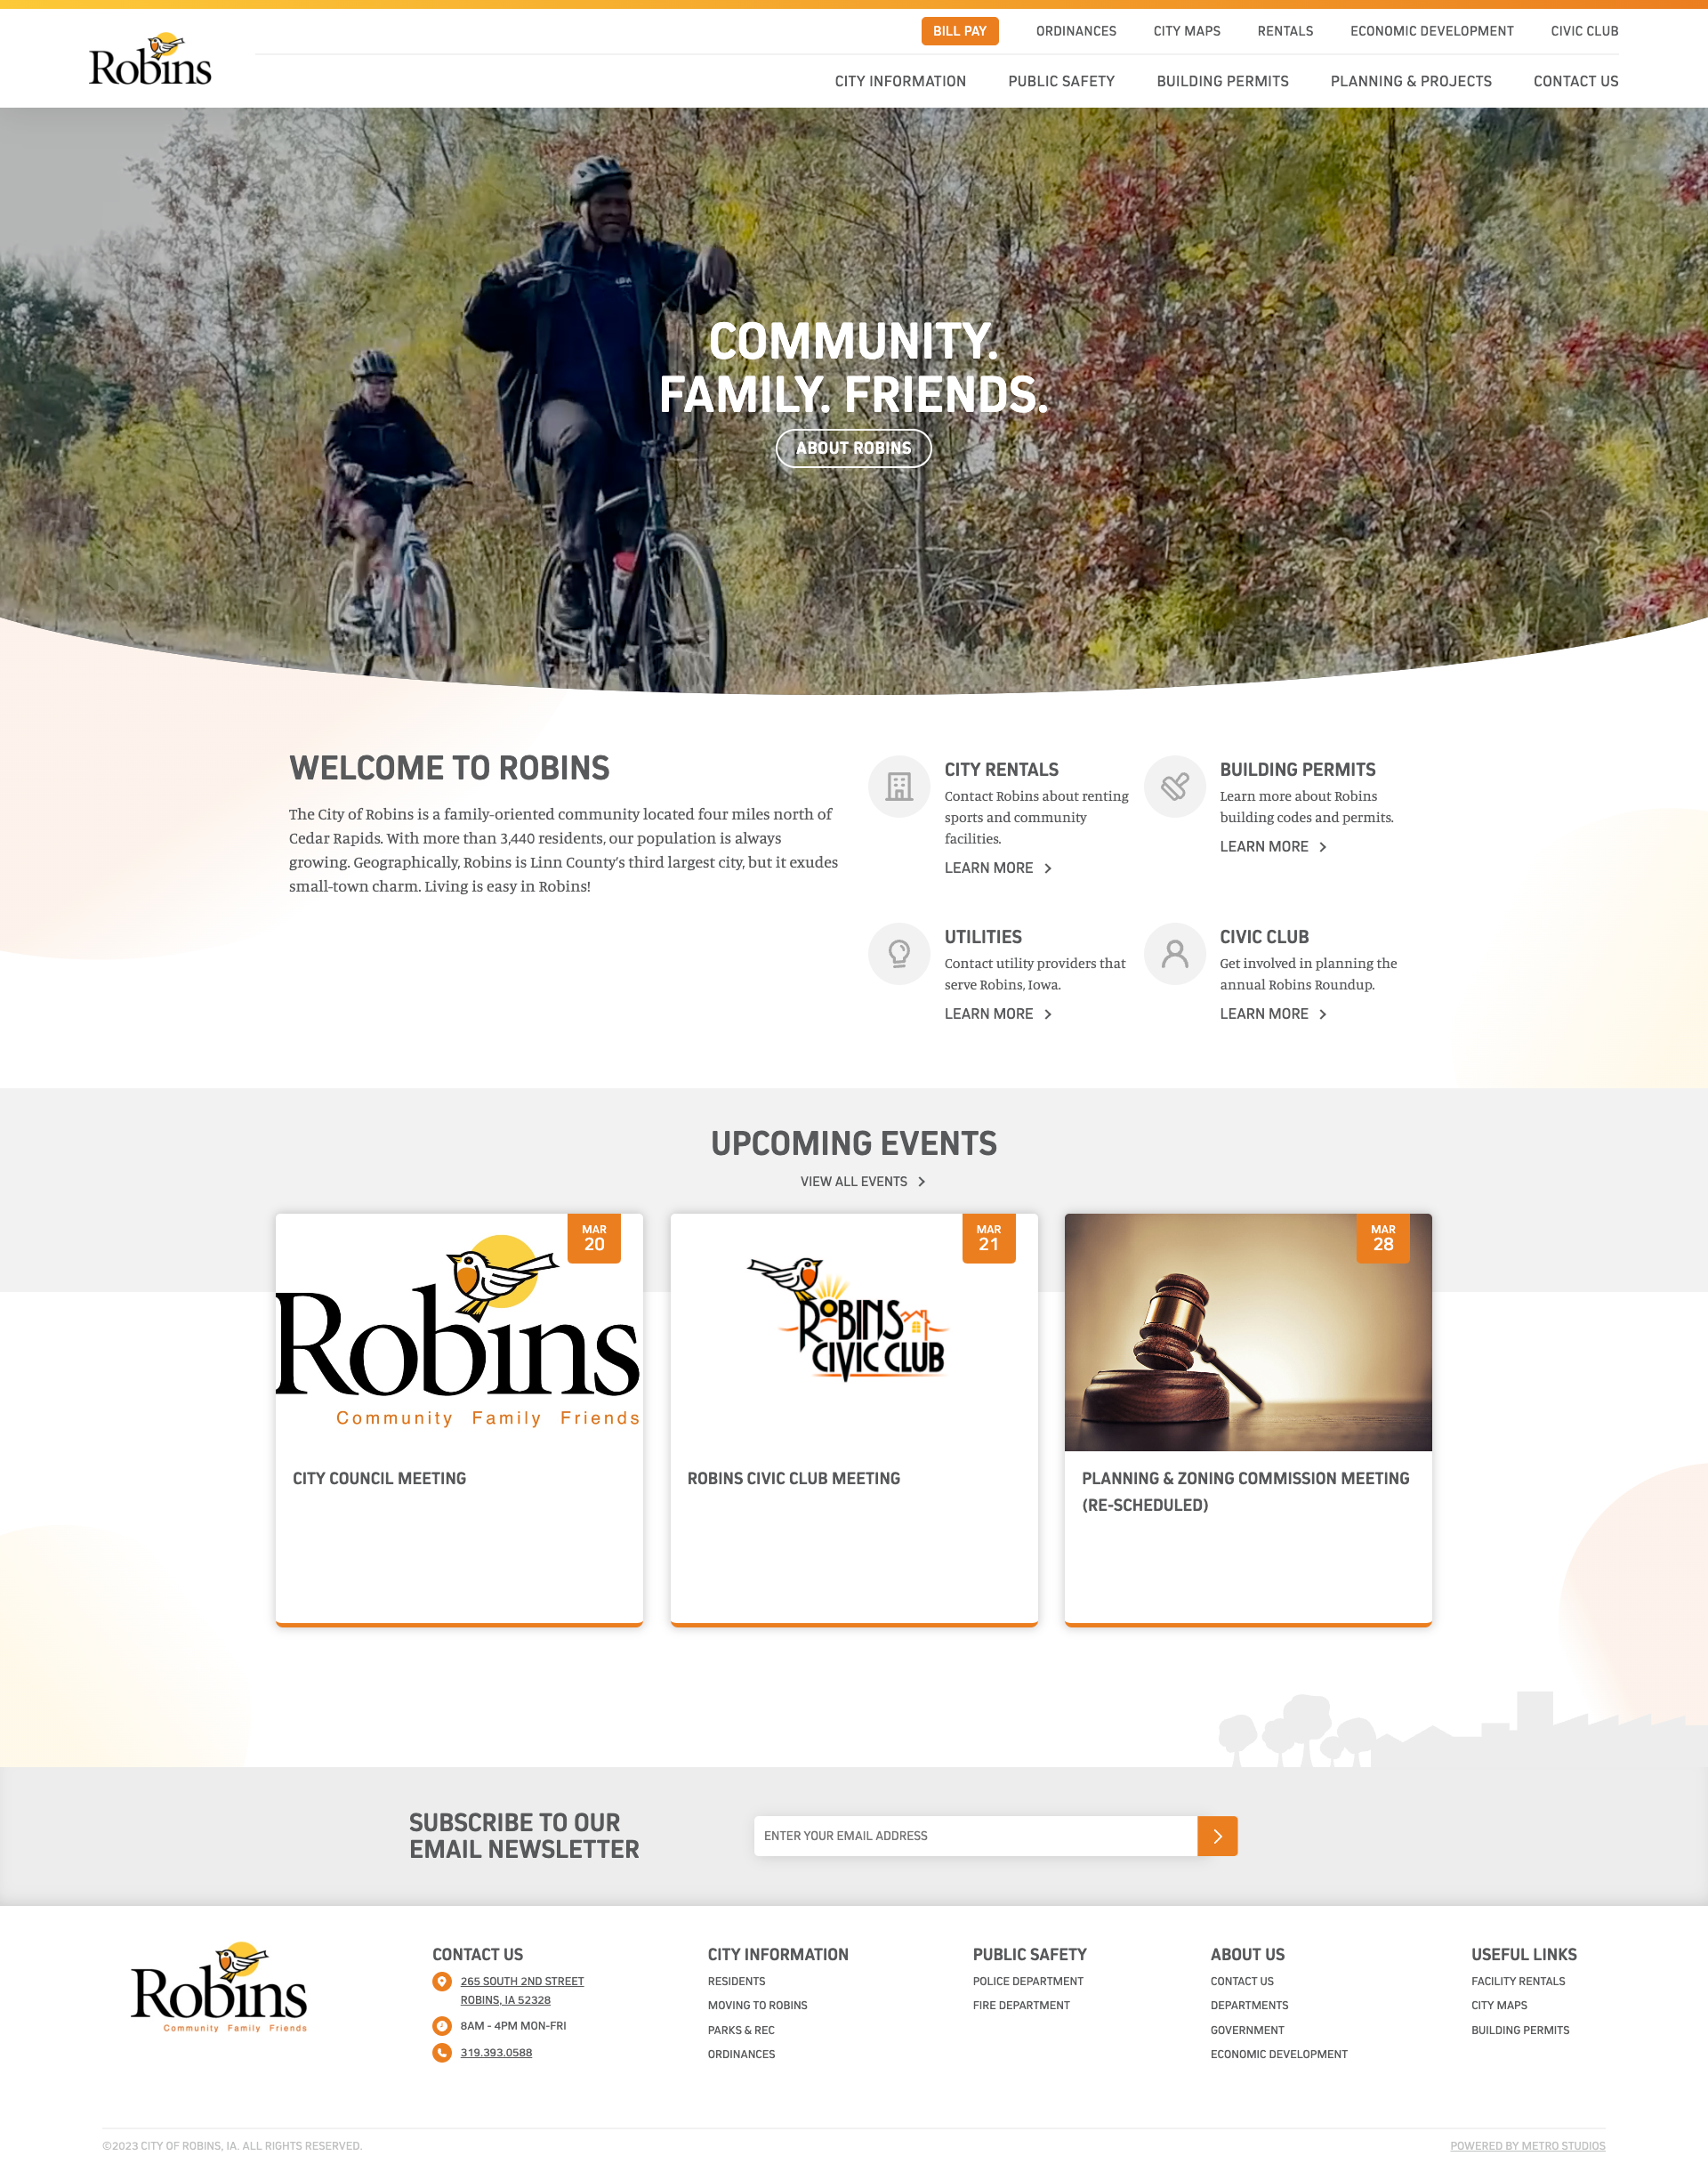 City of Robins Home Page